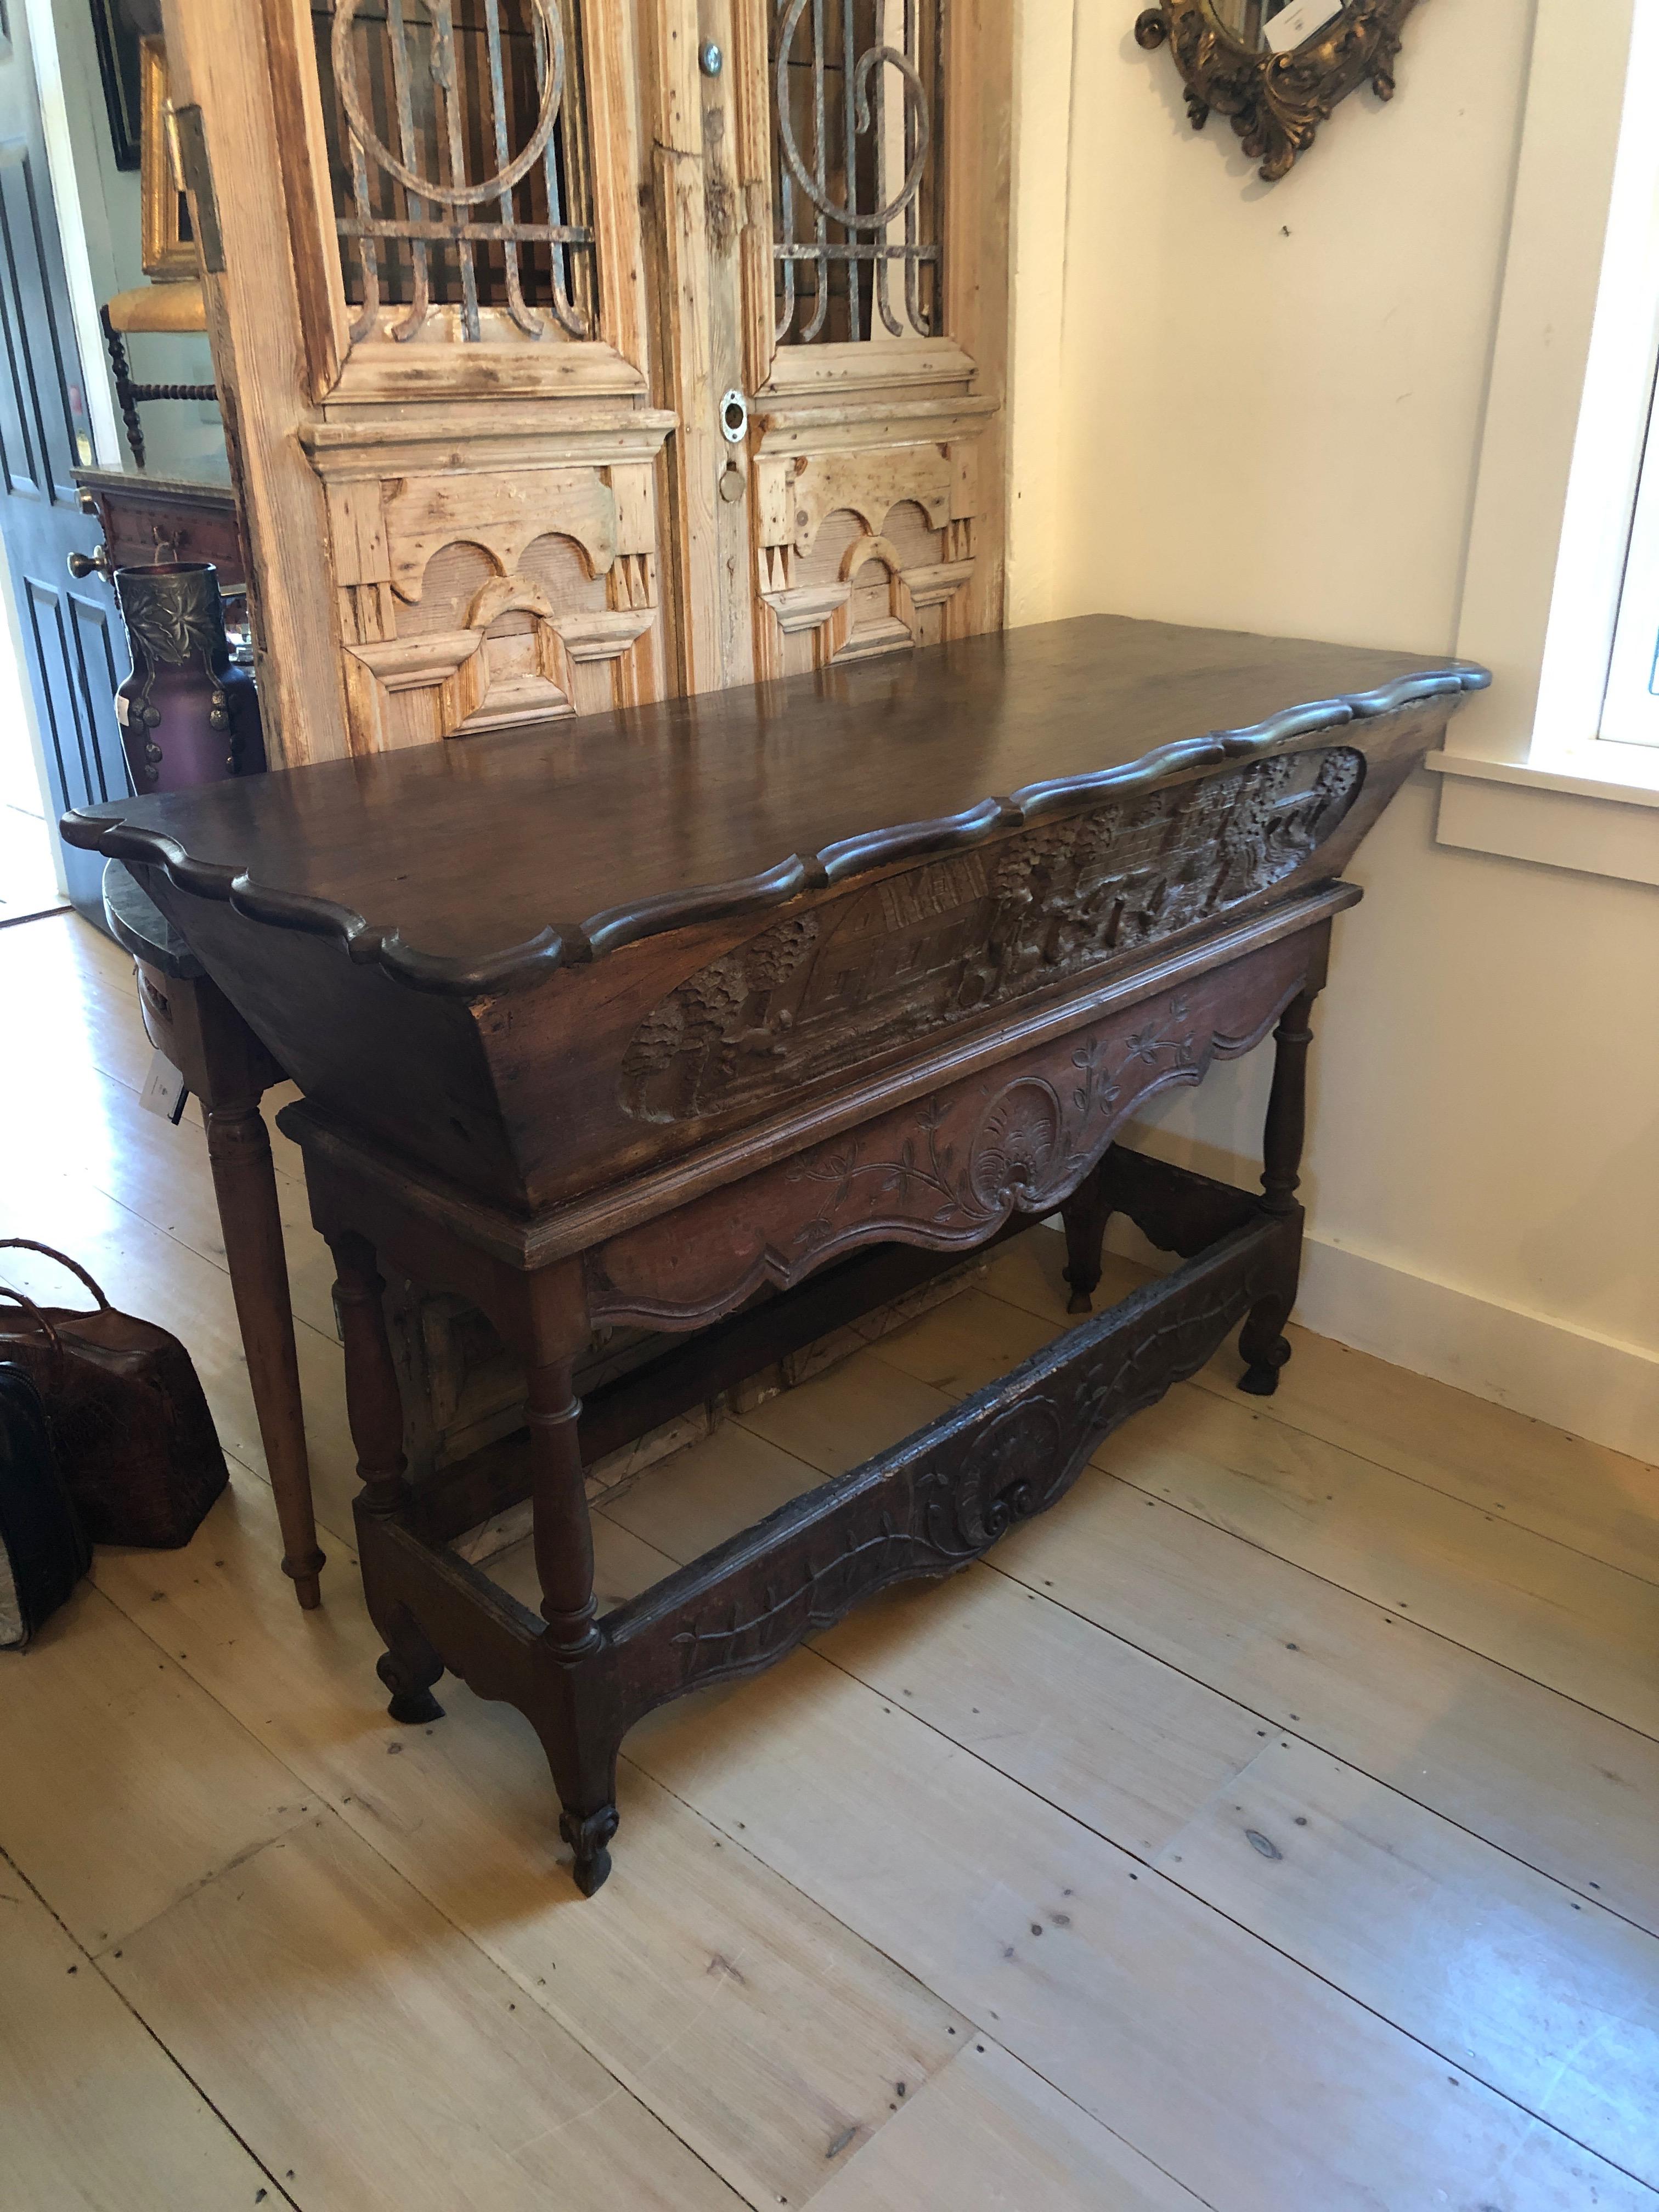 A gorgeous old Pelesia, Petrin or baker's bread table having wonderful hand carvings of figures, a town and decorative shapes with a removable top that reveals an interior storage chamber for bread. Makes a charming and rare console.